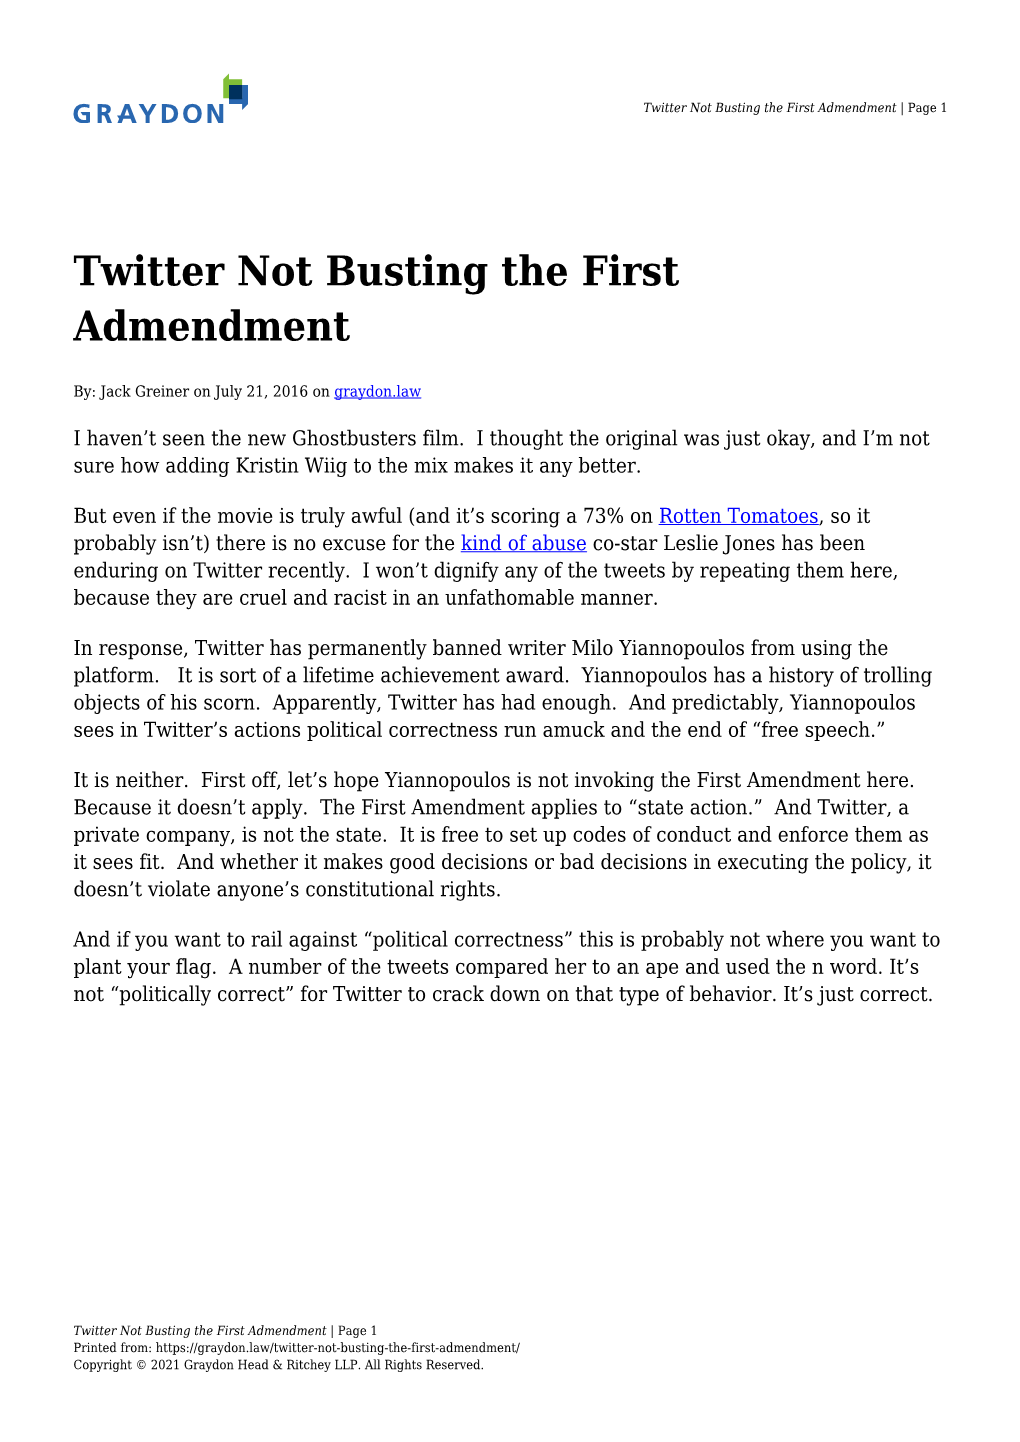 Twitter Not Busting the First Admendment | Page 1